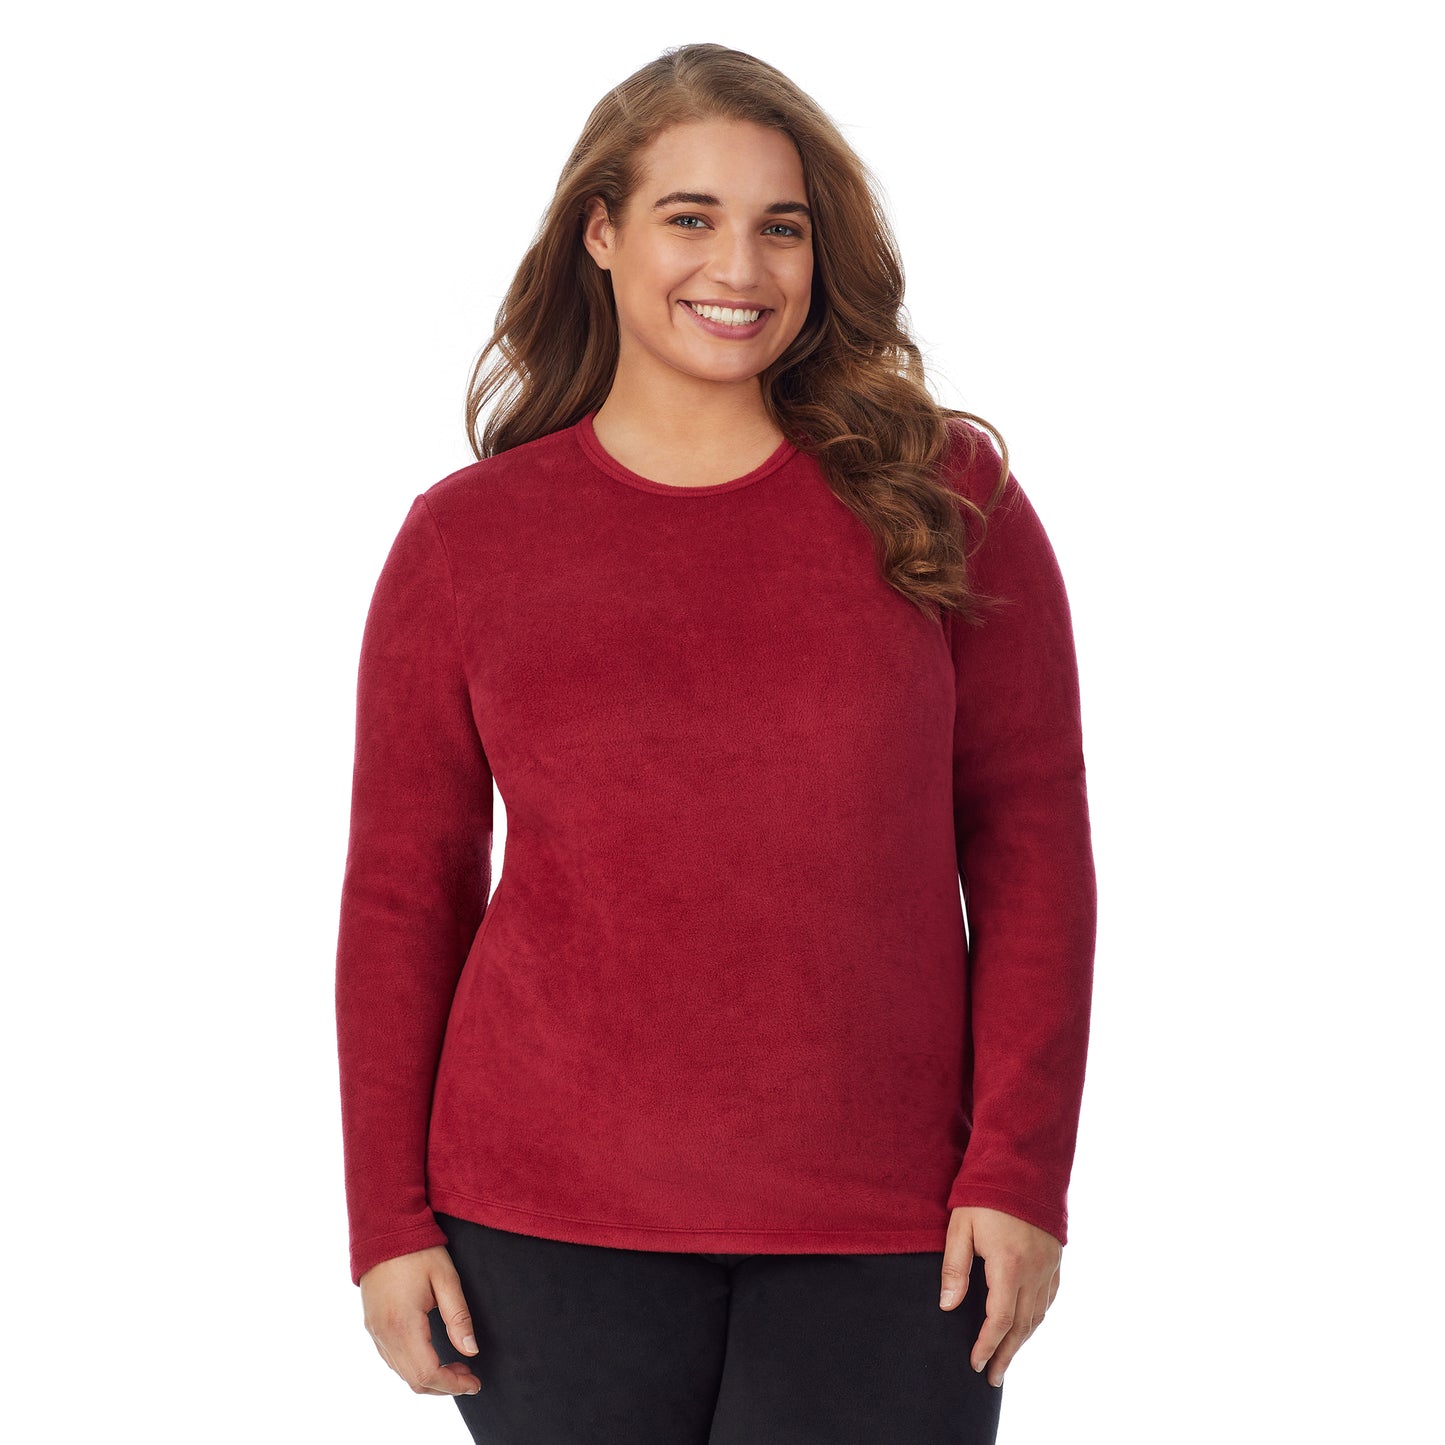 Rhubarb; Model is wearing size 1X. She is 5'7", Bust 42.5", Waist 34.5", Hips 46".@Upper body of a lady wearing red long sleeve crew